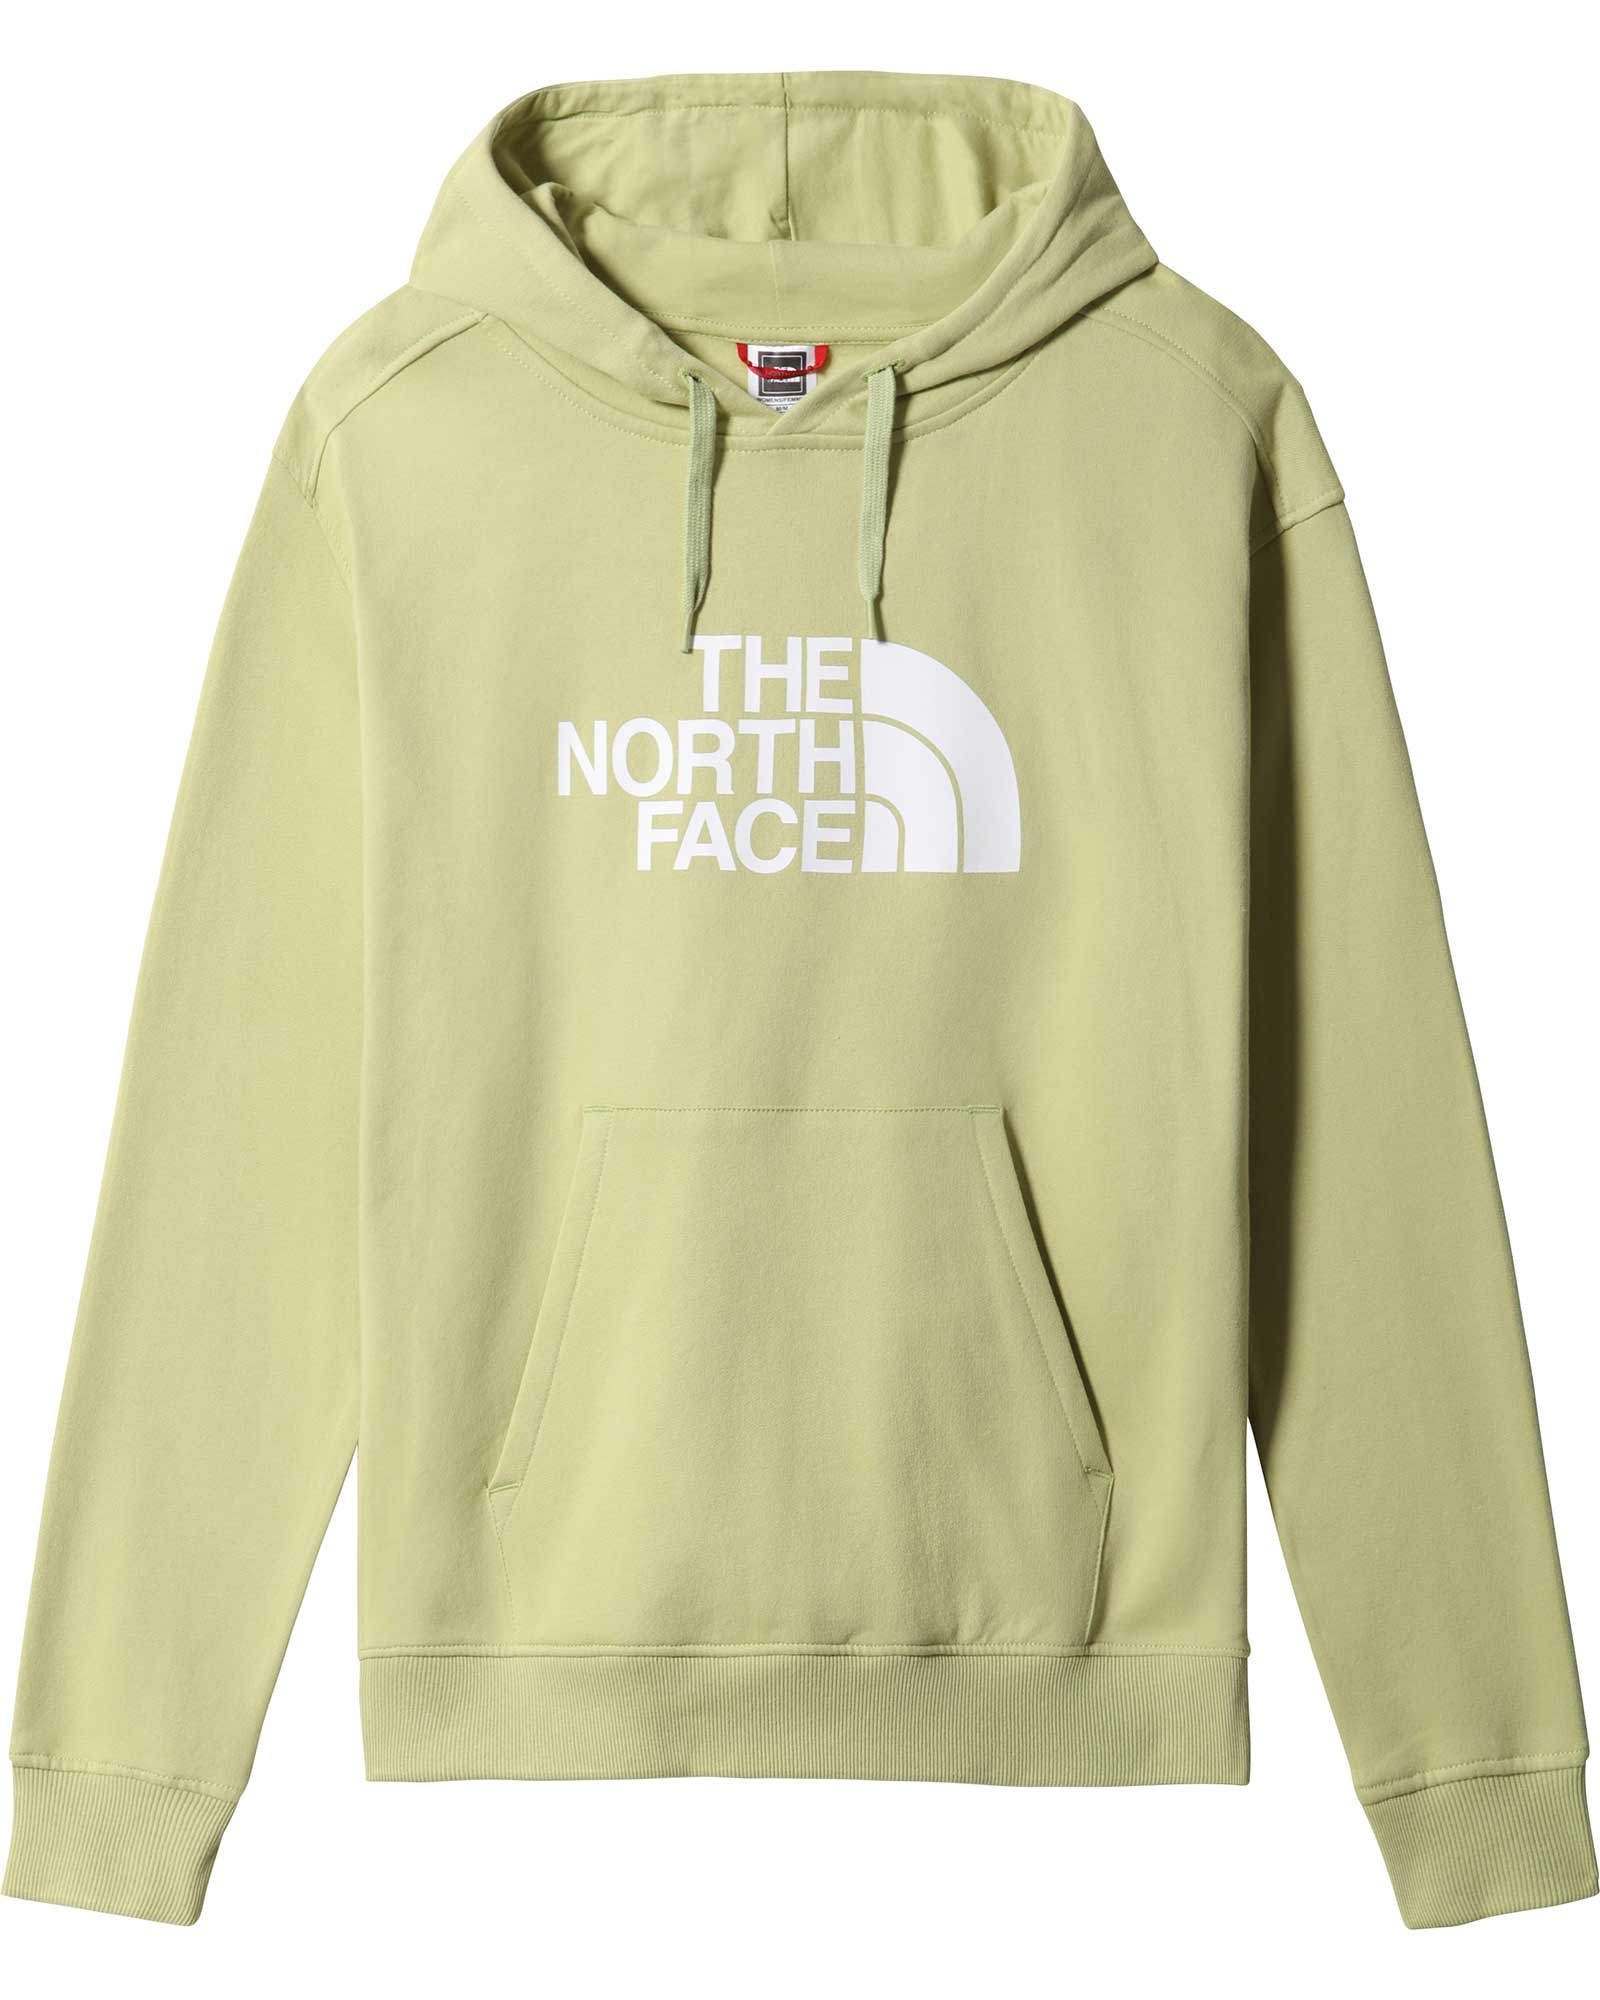 The North Face Light Drew Peak Women’s Hoodie - Weeping Willow XS